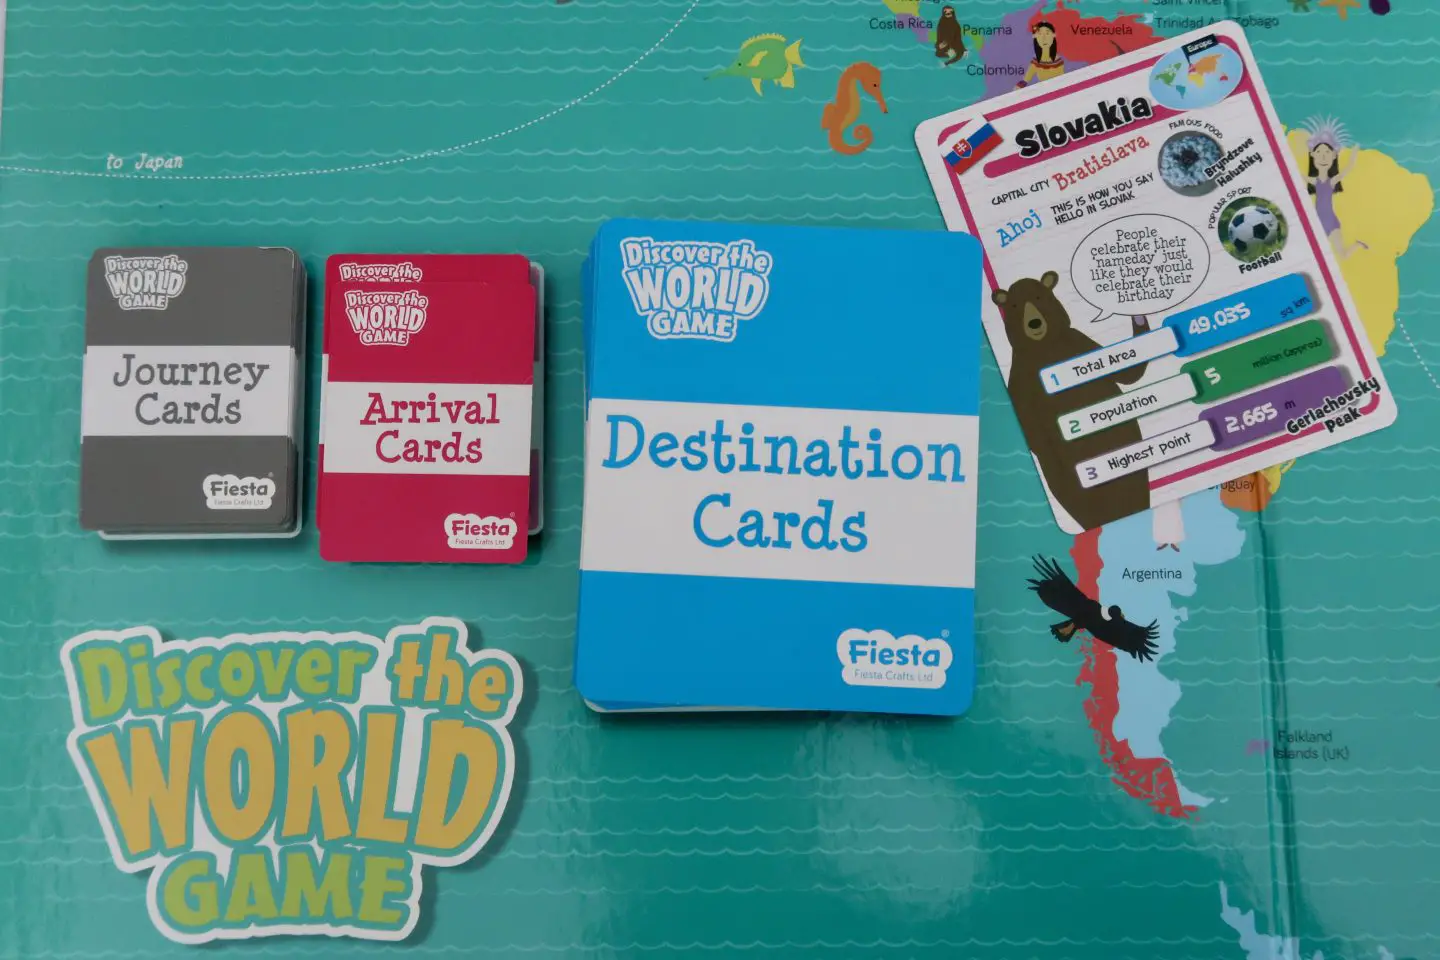 A corner of the Discover The World Game board, with Destination cards, Journey cards and Arrival cards